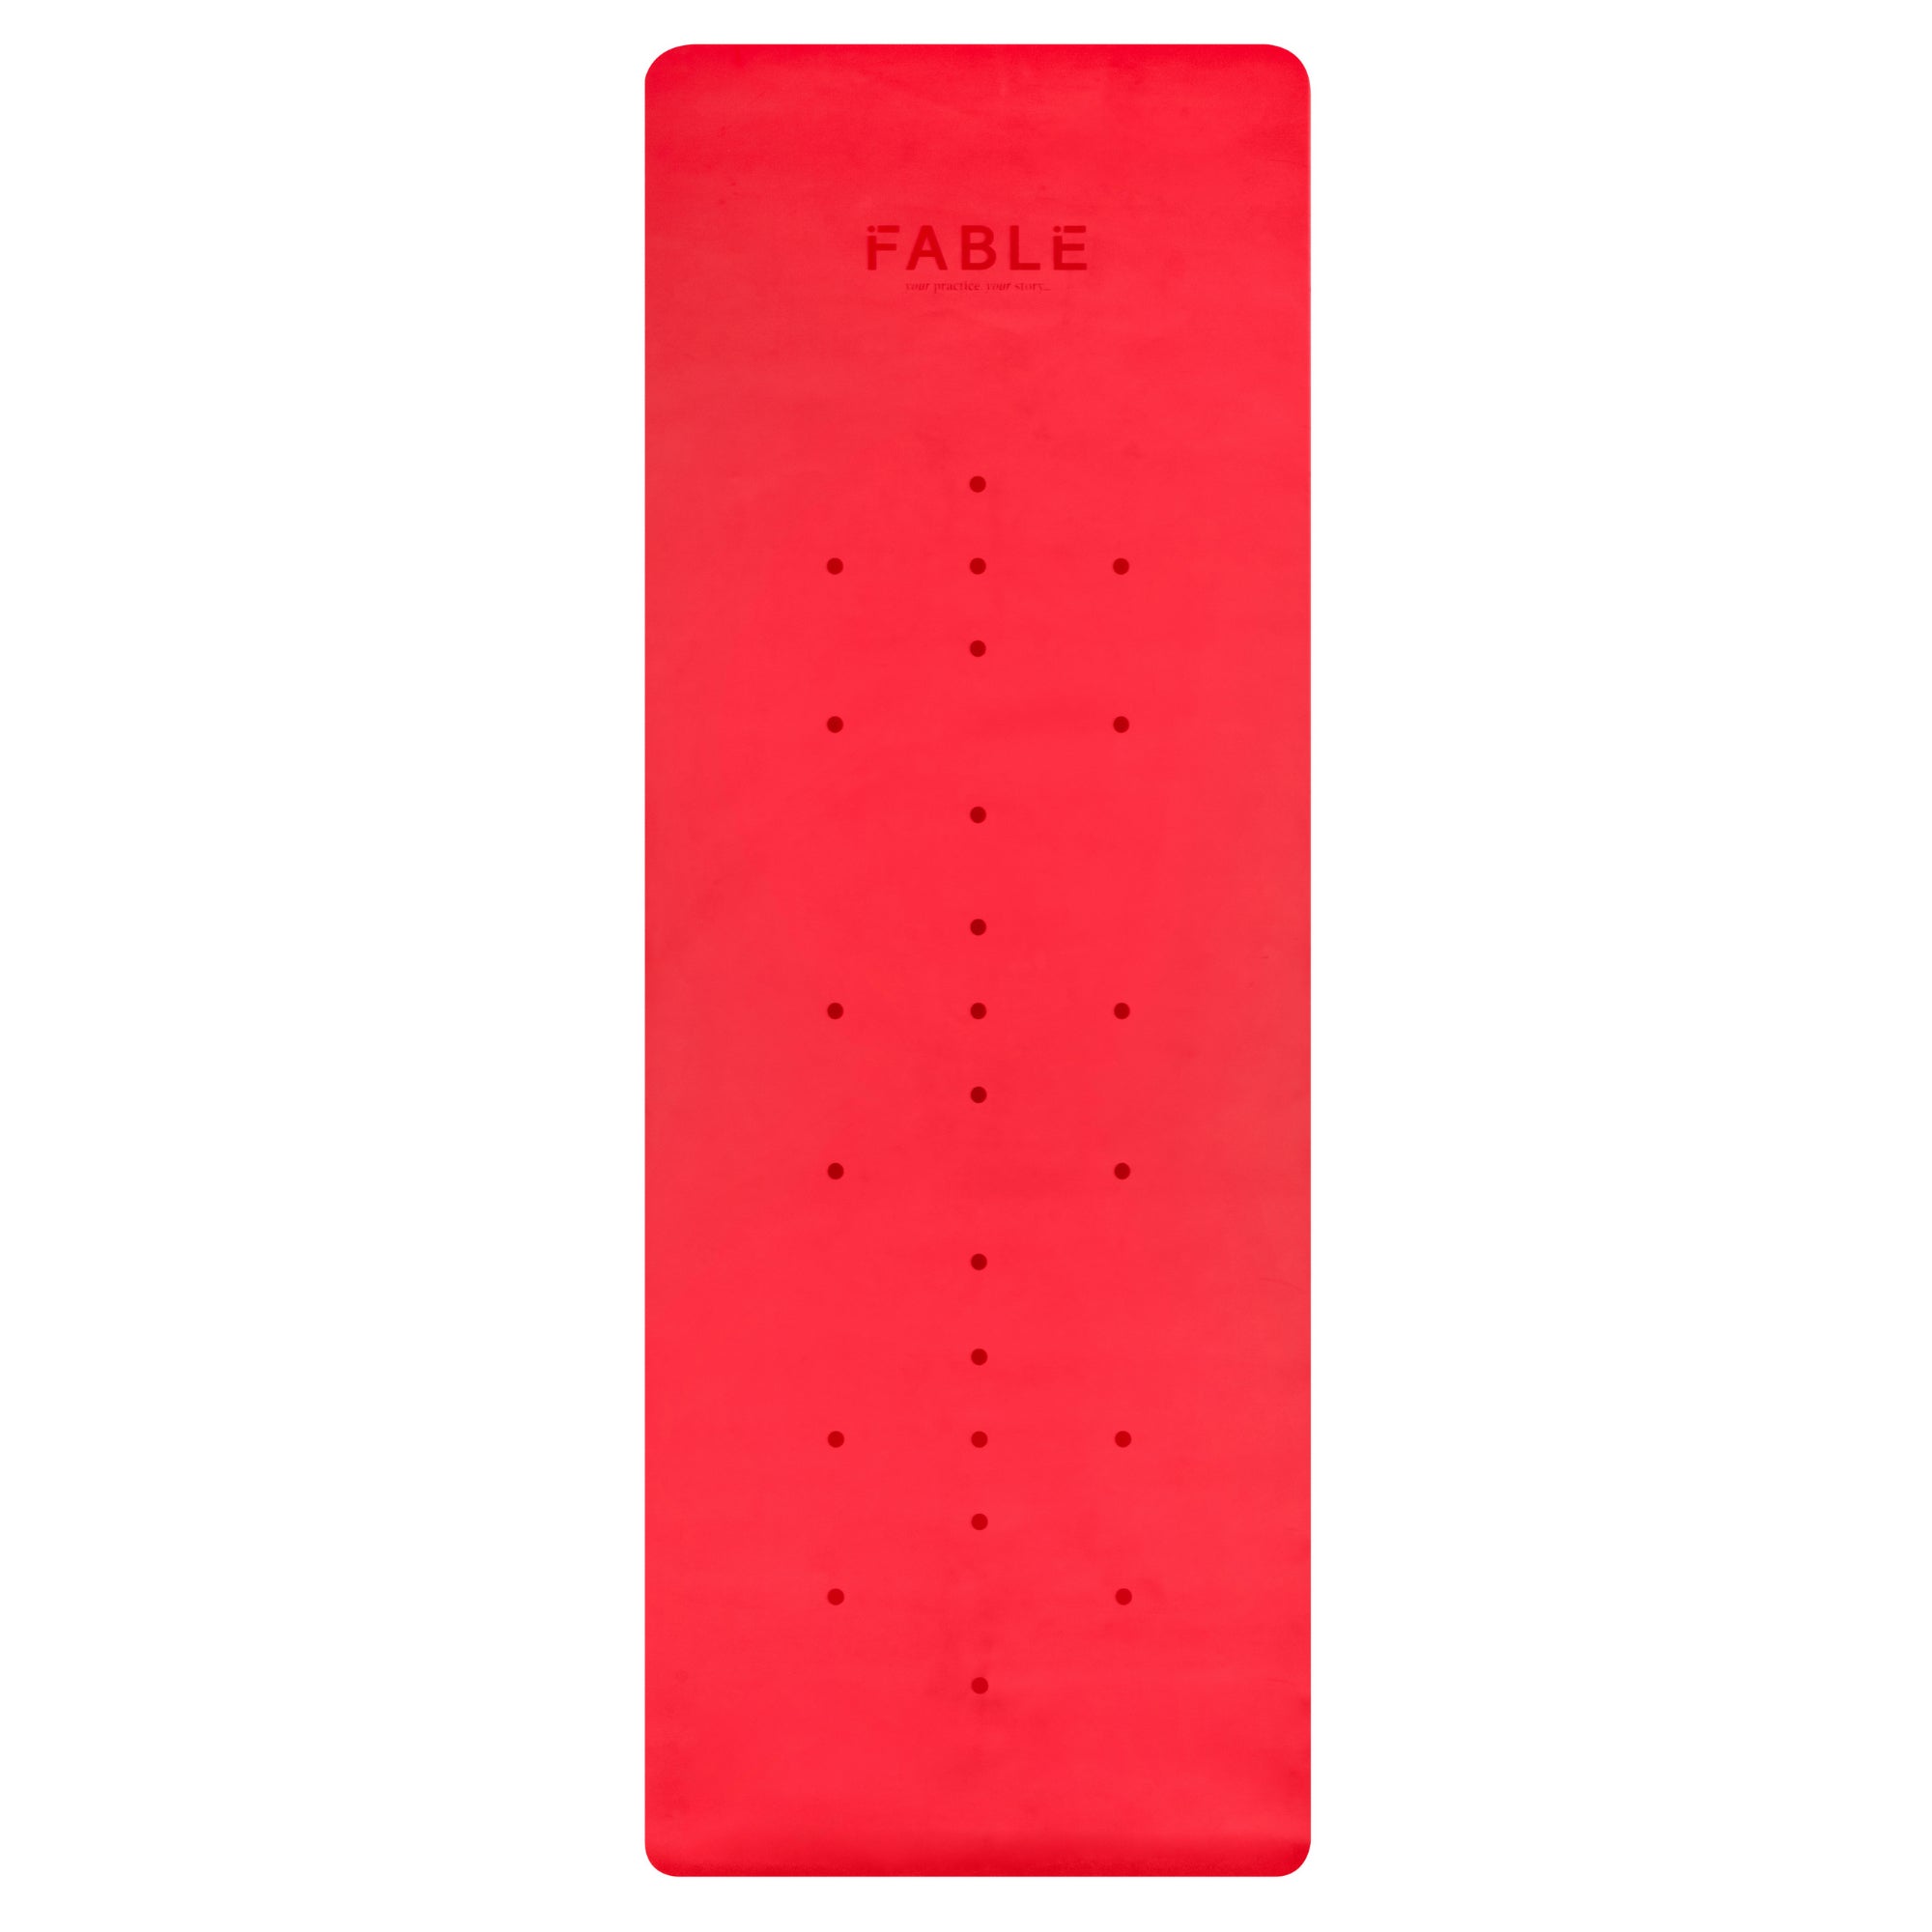 Fable Yoga Red Travel Yoga Mat -  2mm Commuter Special Edition Colour